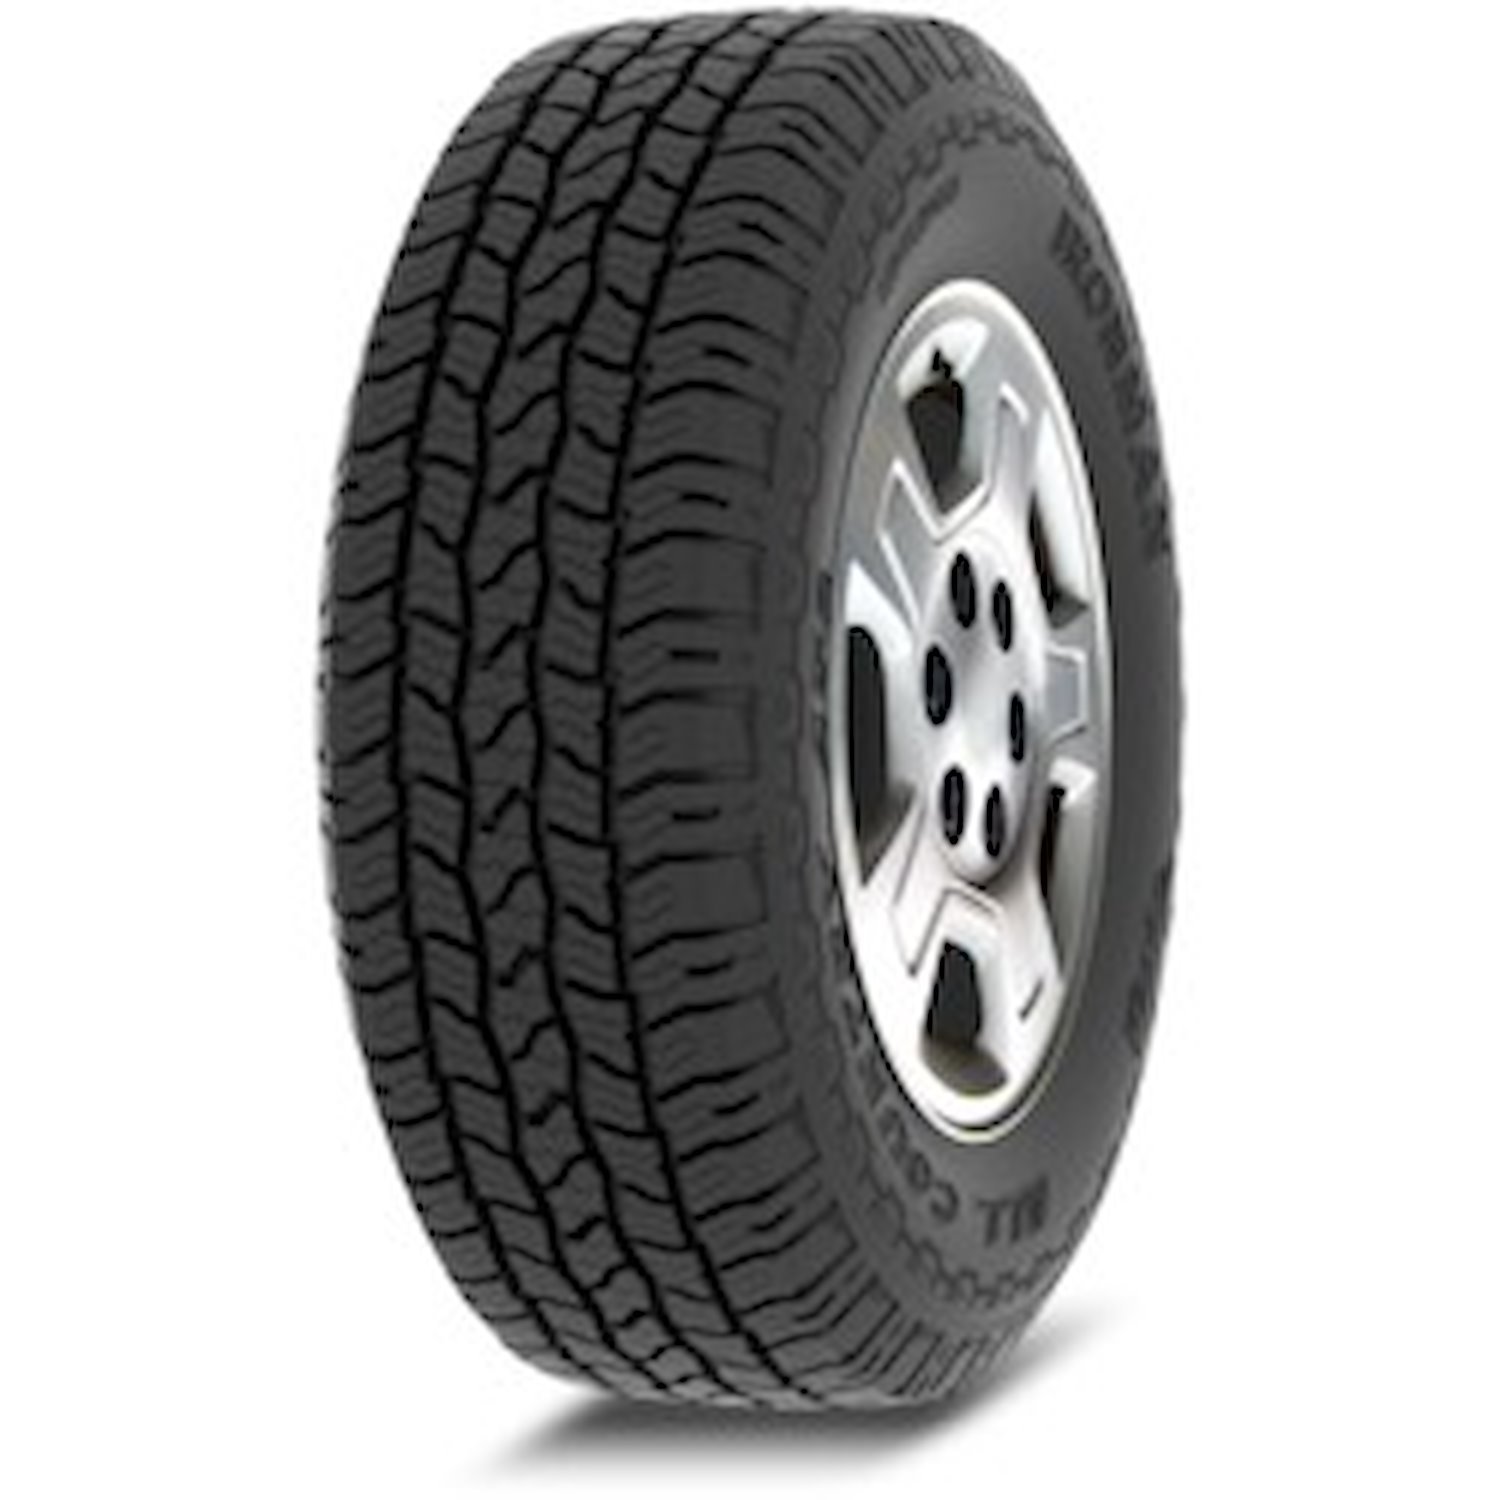 07702 All Country AT2 Tire, LT275/70R18, 125/122S